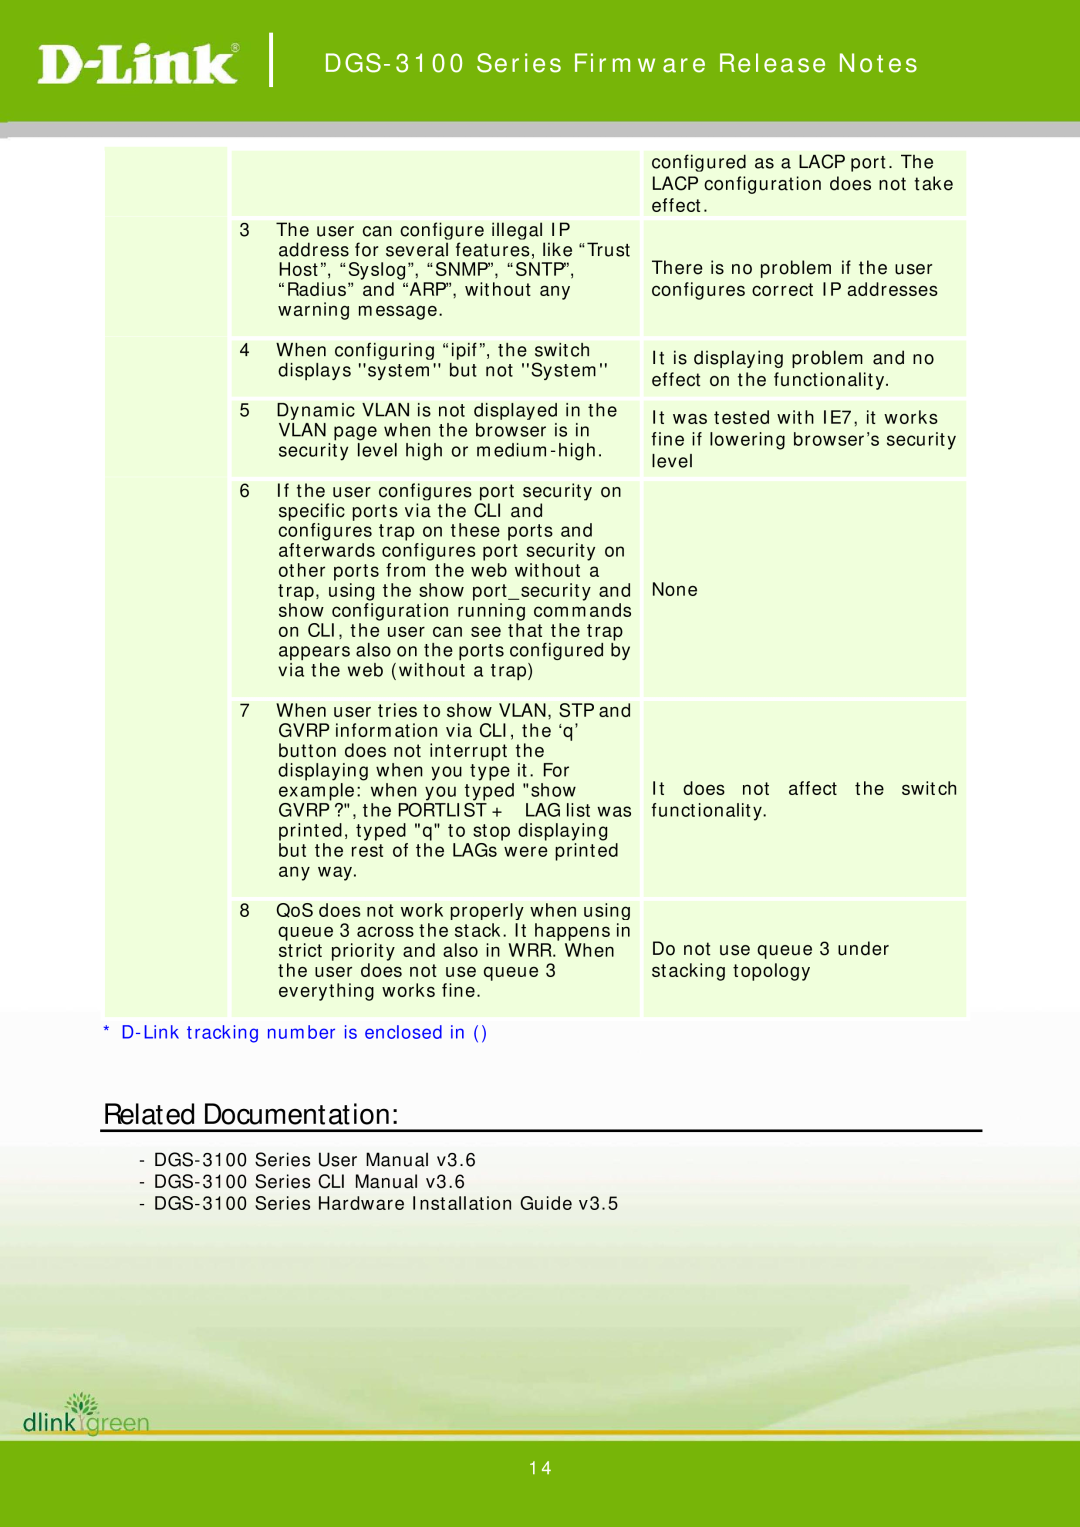 D-Link 3.60.28 manual Related Documentation, DGS-3100 Series Firmware Release Notes, D-Link tracking number is enclosed in 